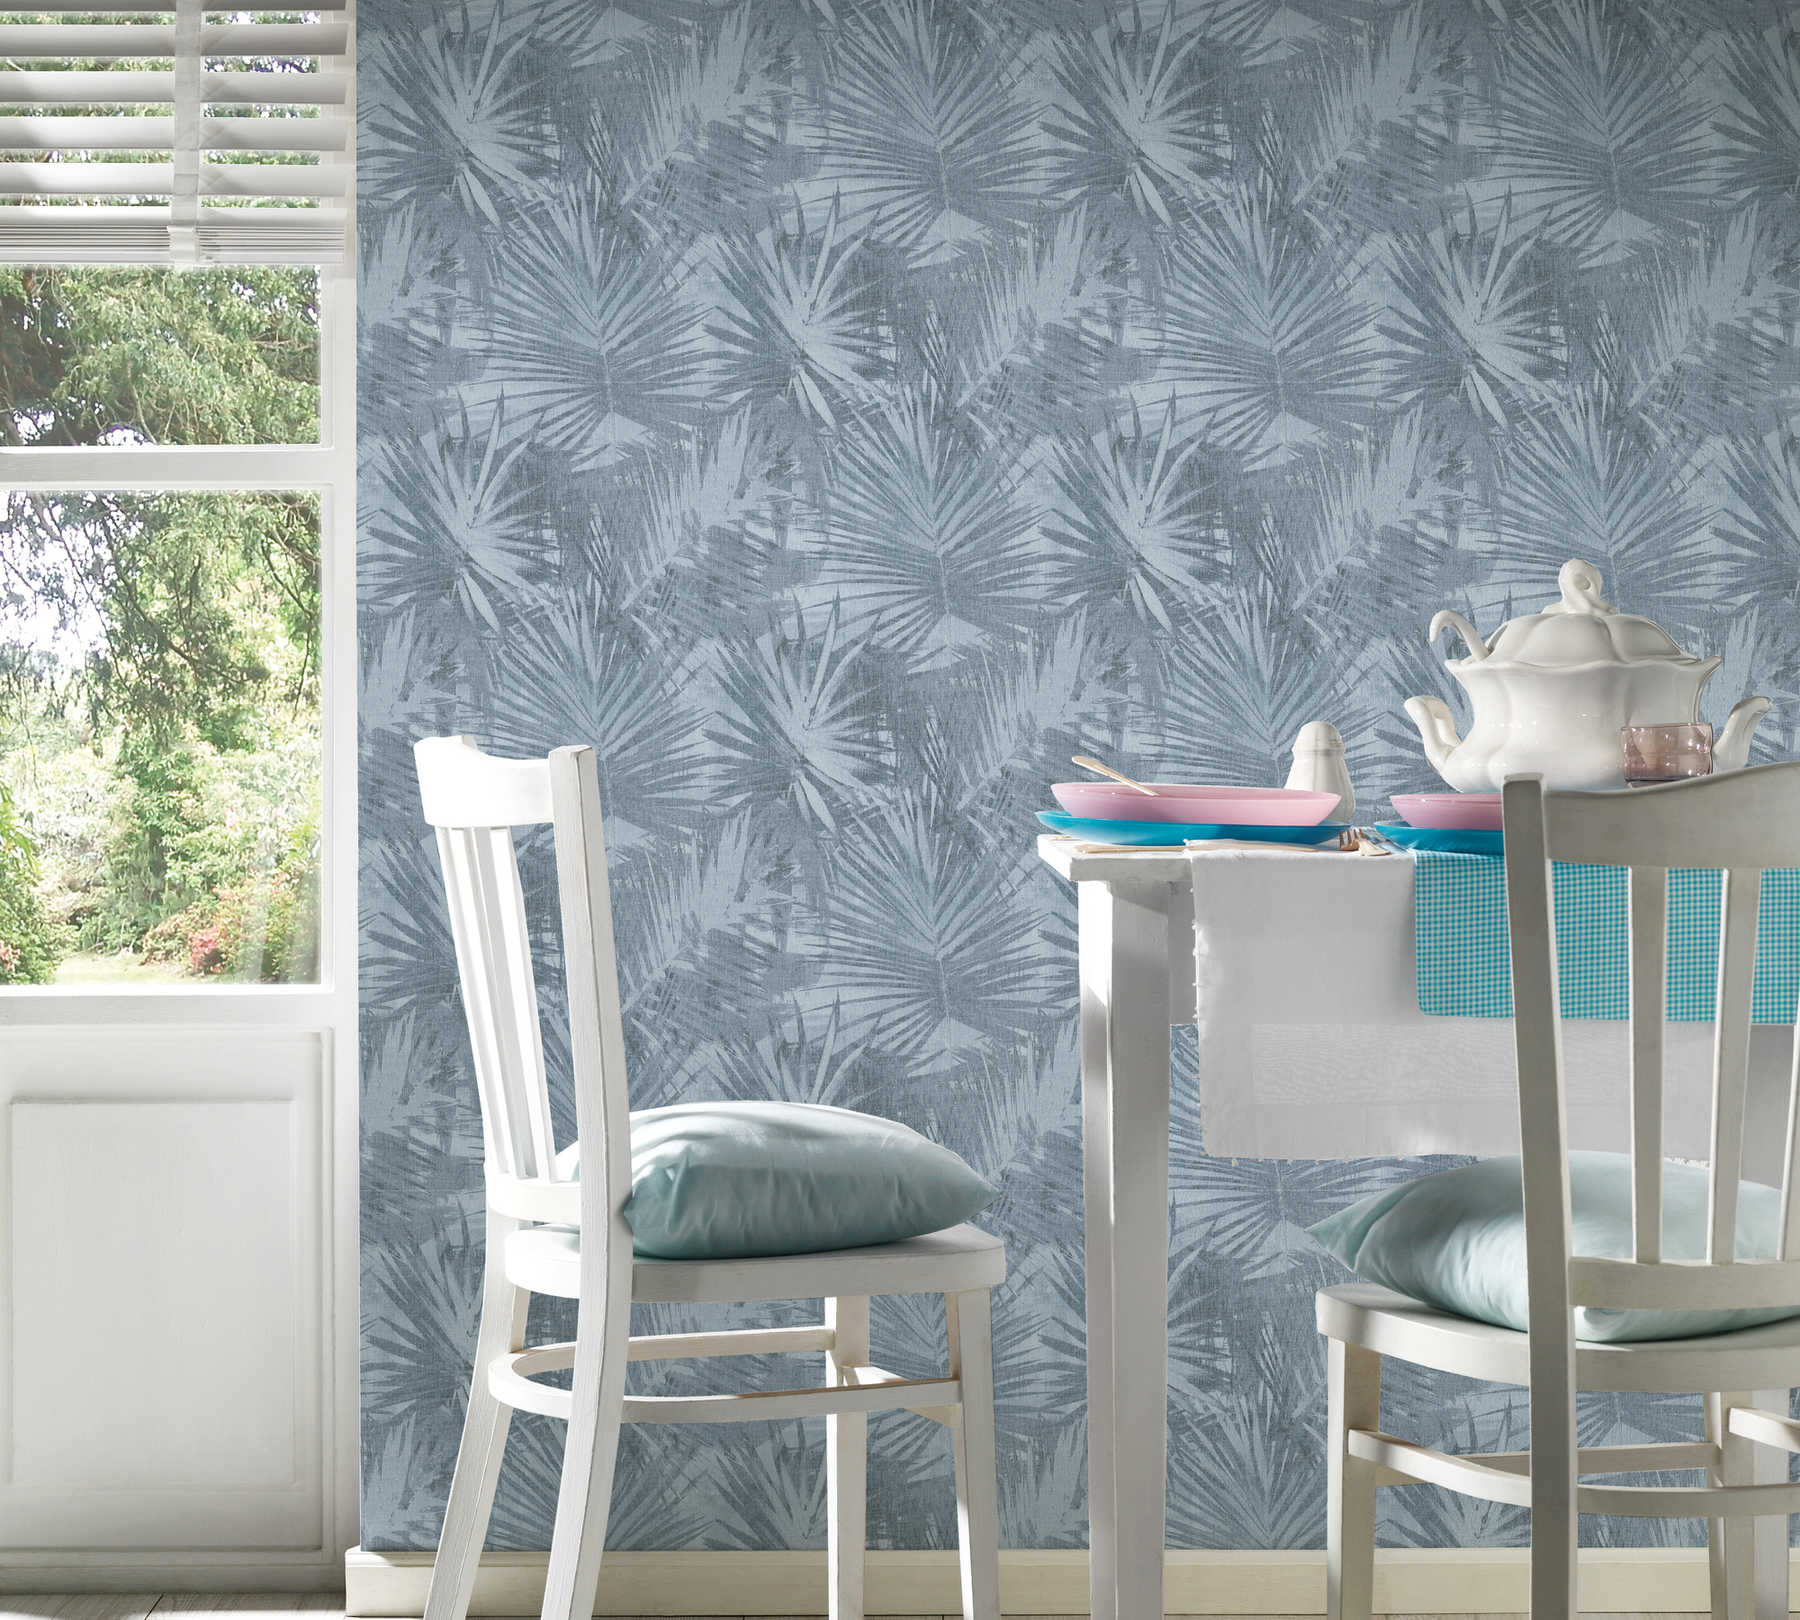             Linen look non-woven wallpaper with natural leaf pattern - blue
        